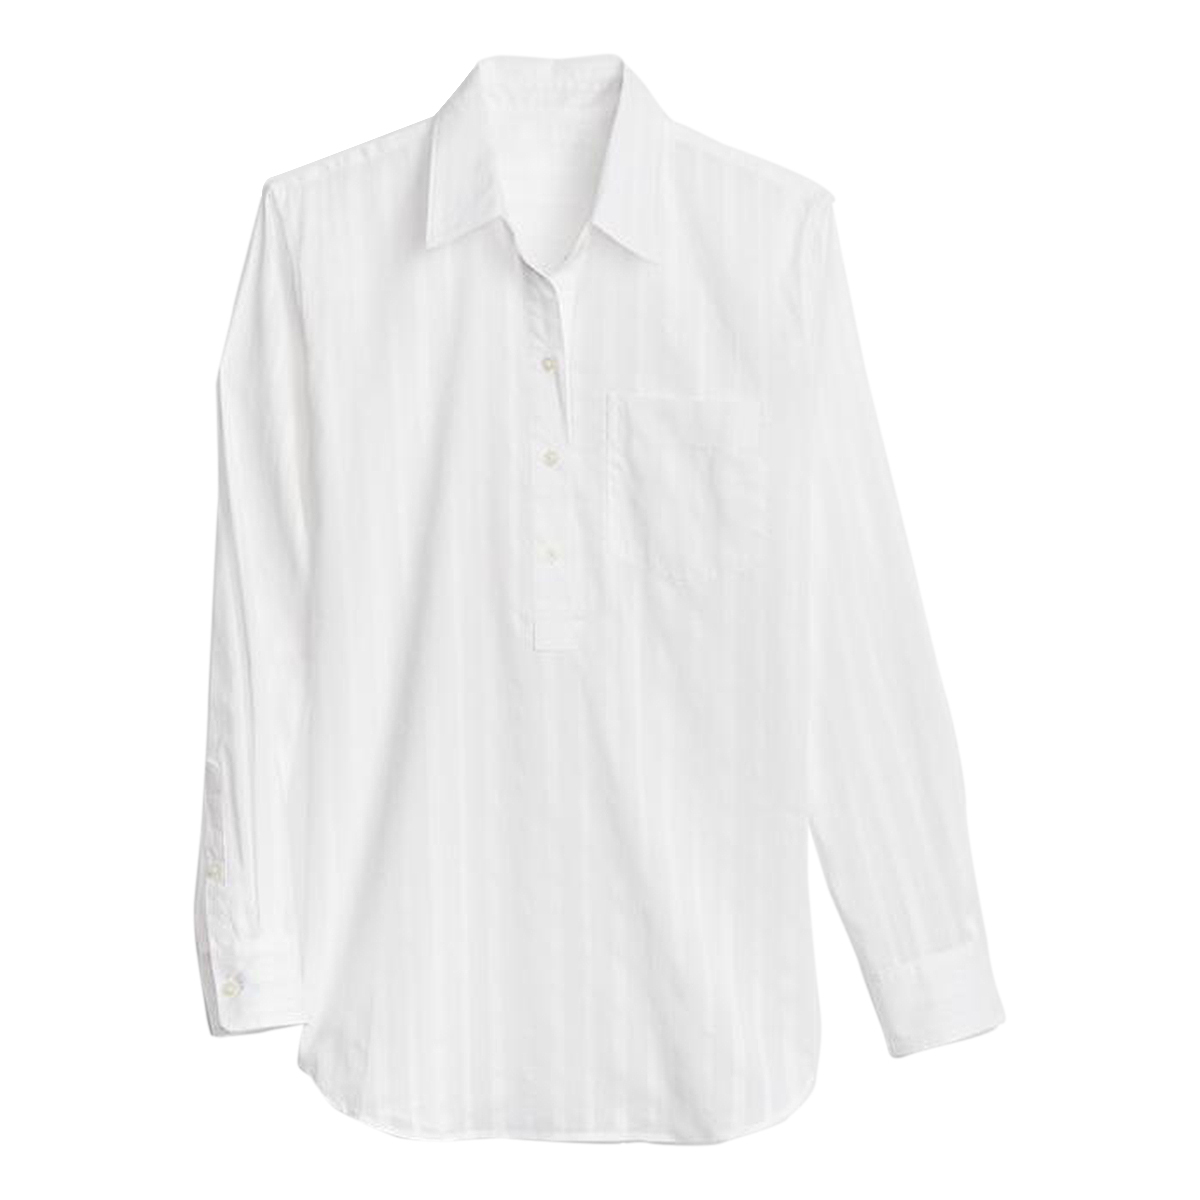 Gap Self Striped Regular Fit Full Sleeve Shirt with Yoke Open Buttons & Patch Pocket - White